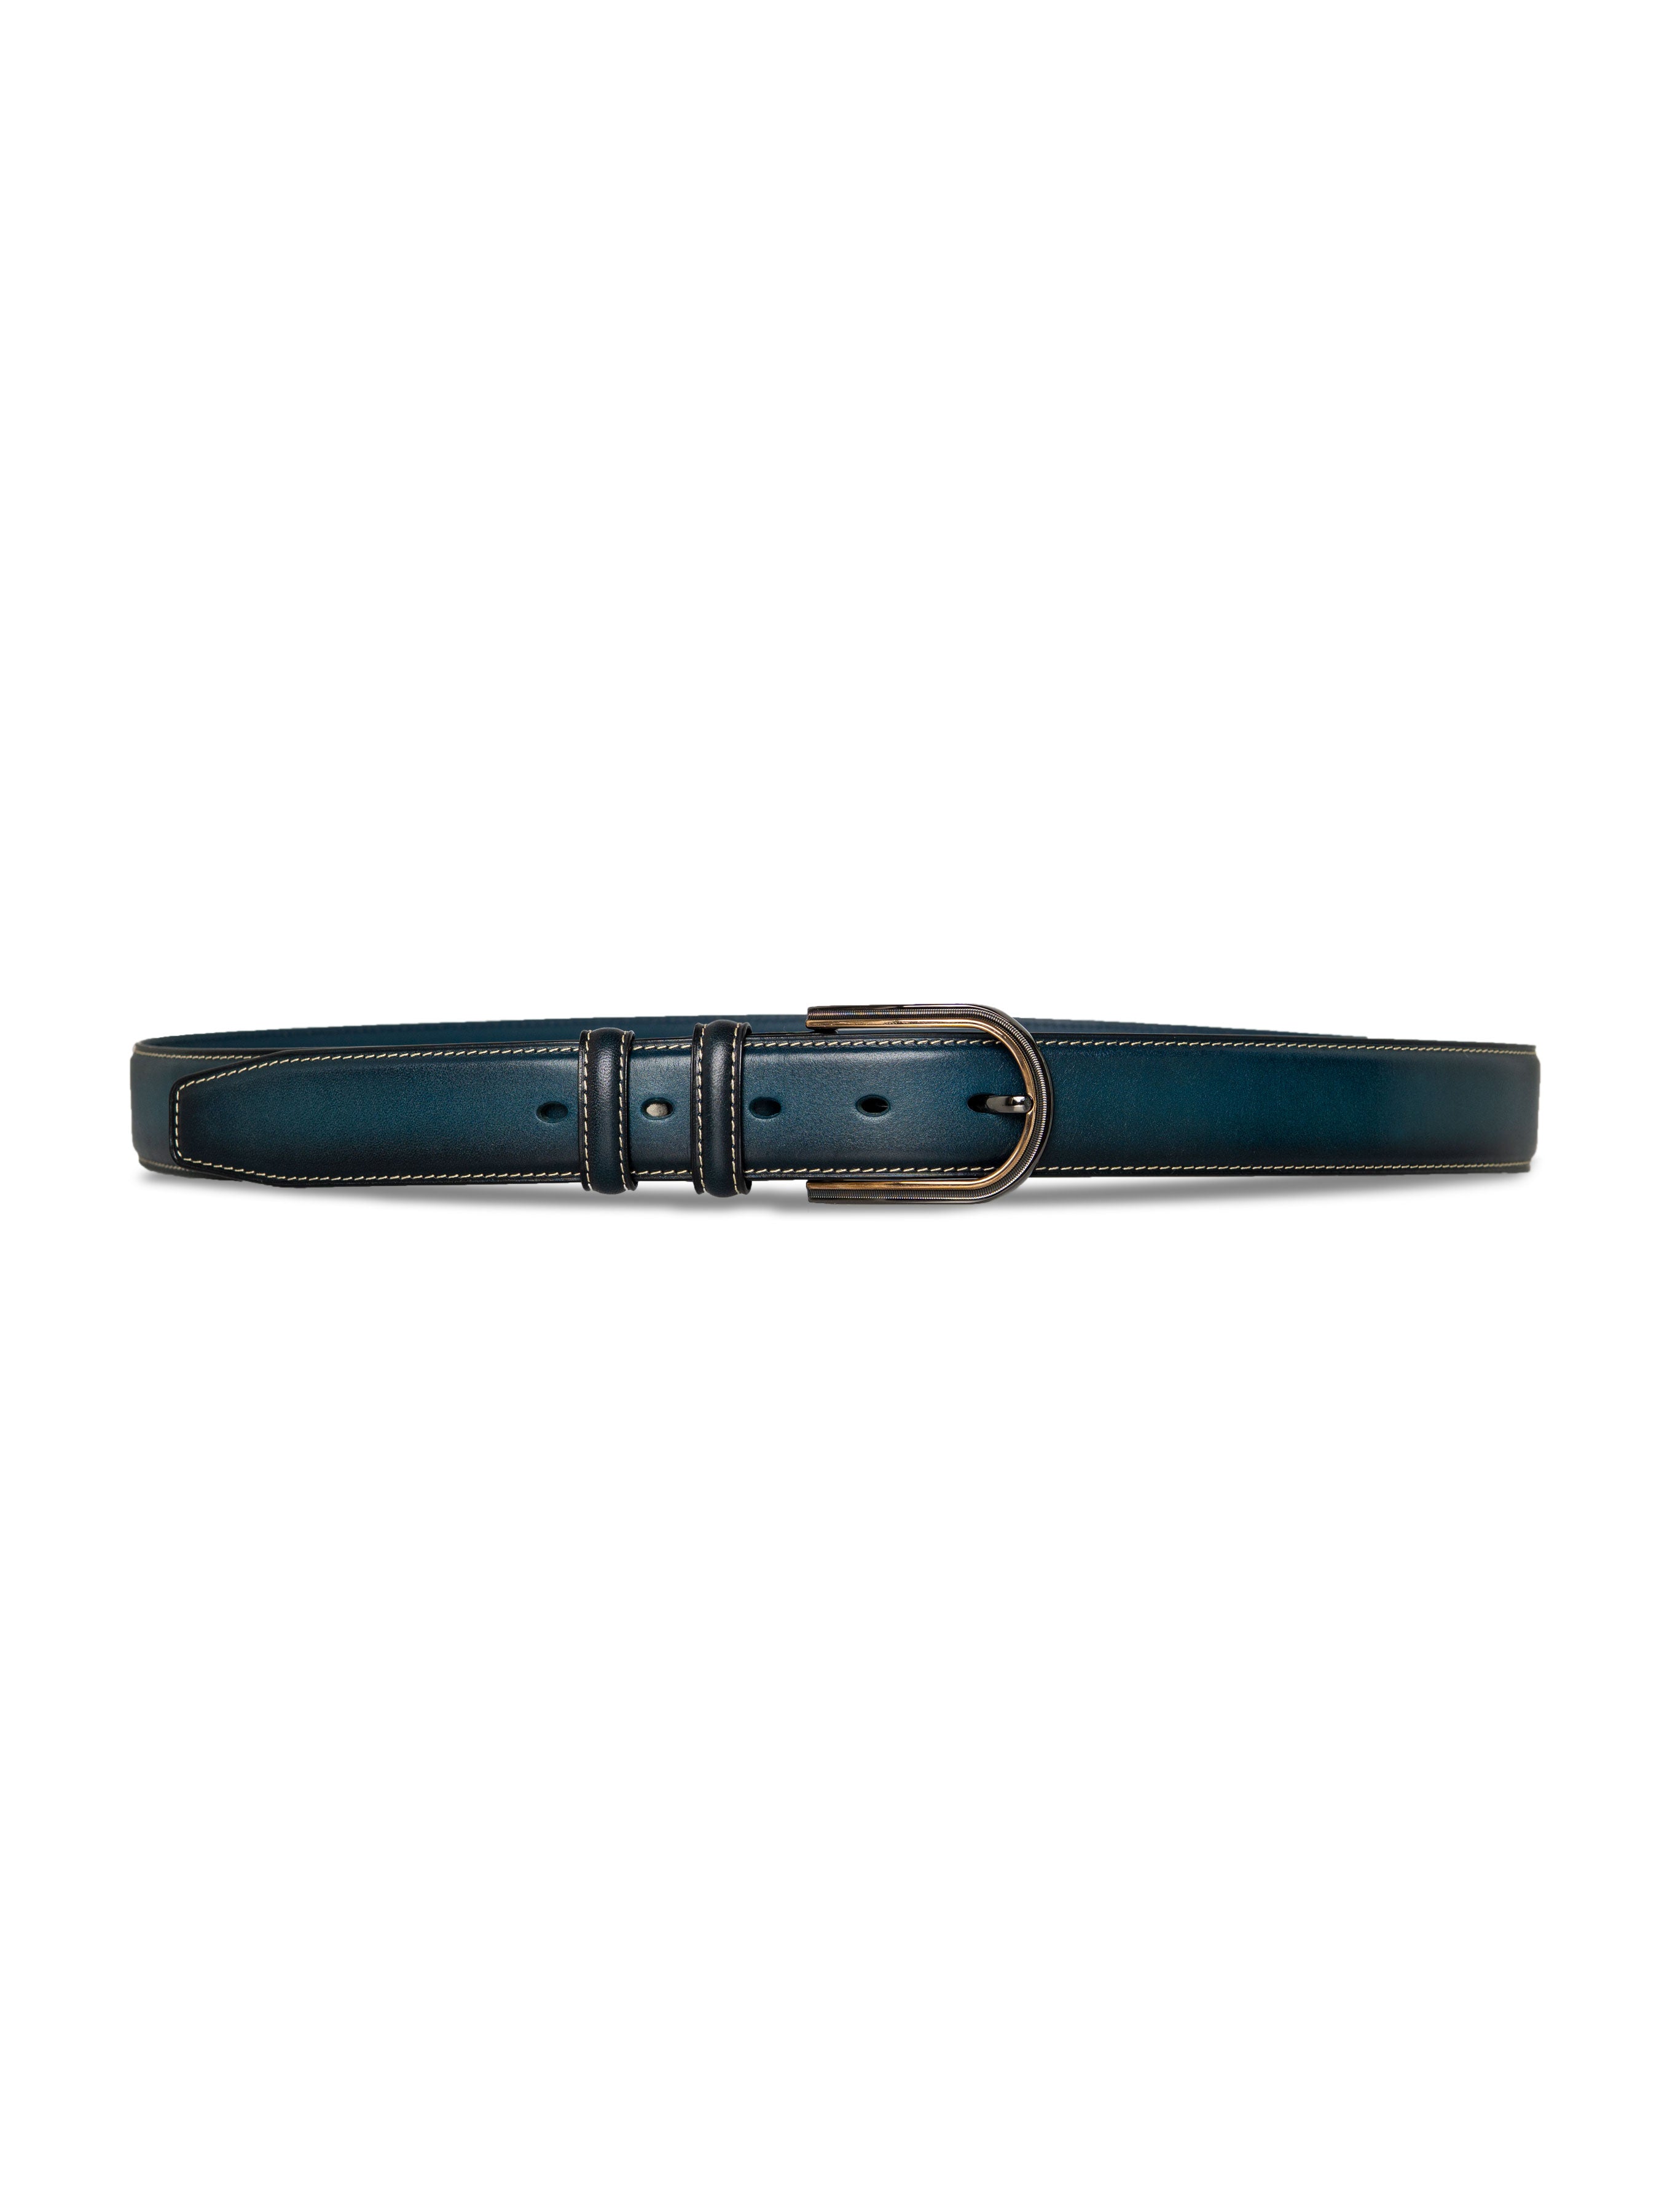 Leather Belt with Palladium-toned Buckle (Hand Painted Patina) - Zeve Shoes